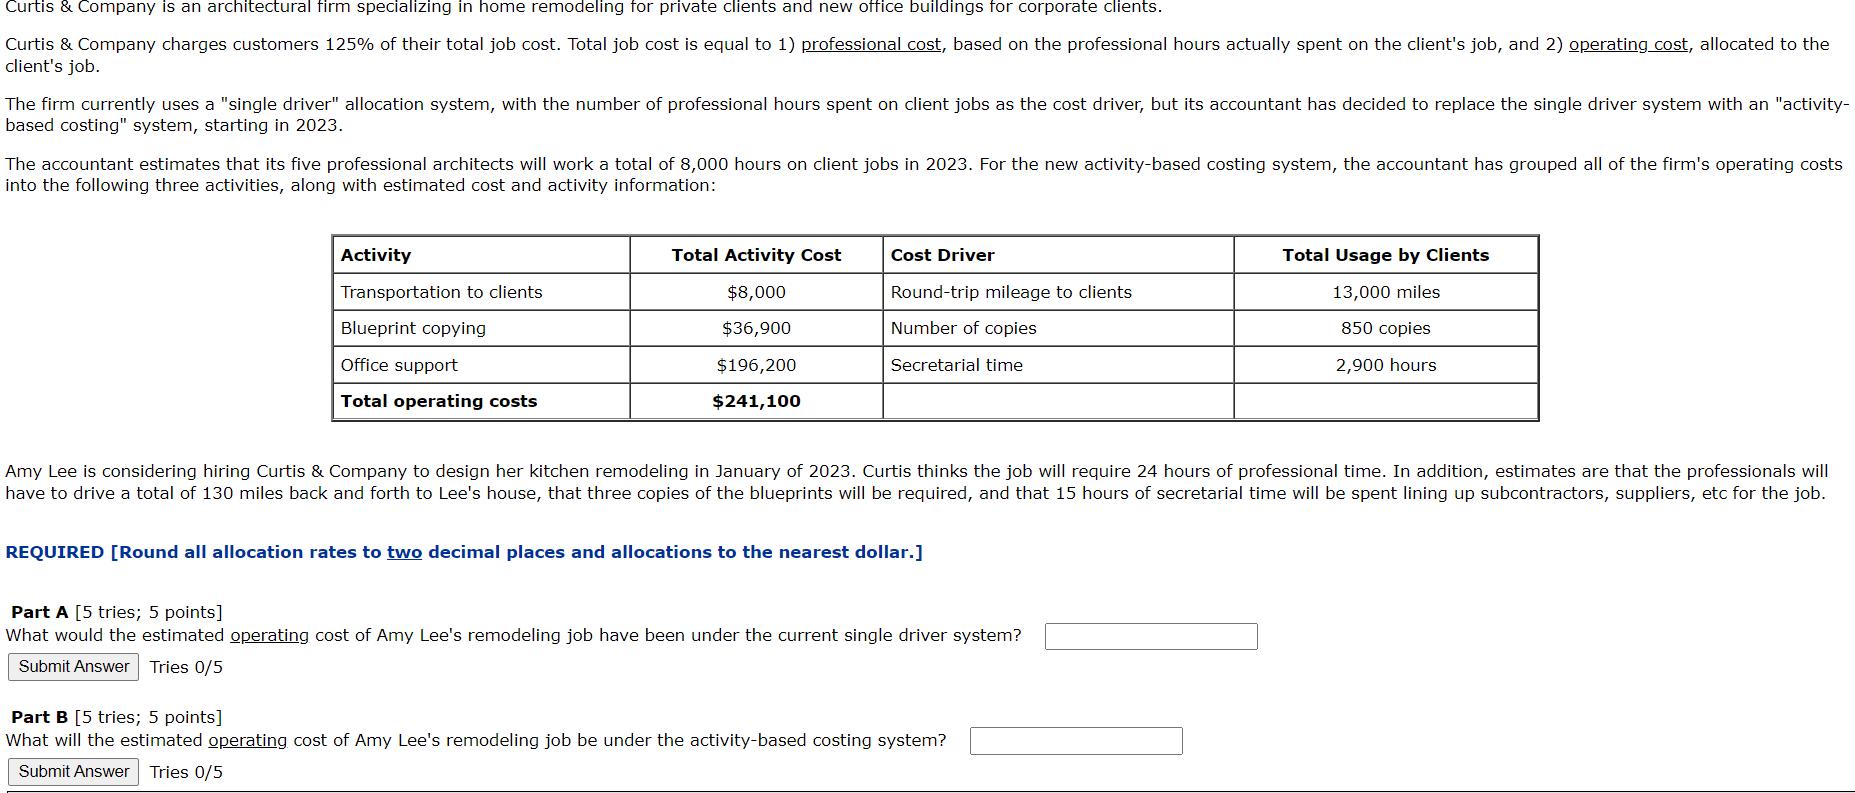 clients job. based costing system, starting in ( 2023 . ) into the following three activities, along with estimated cost